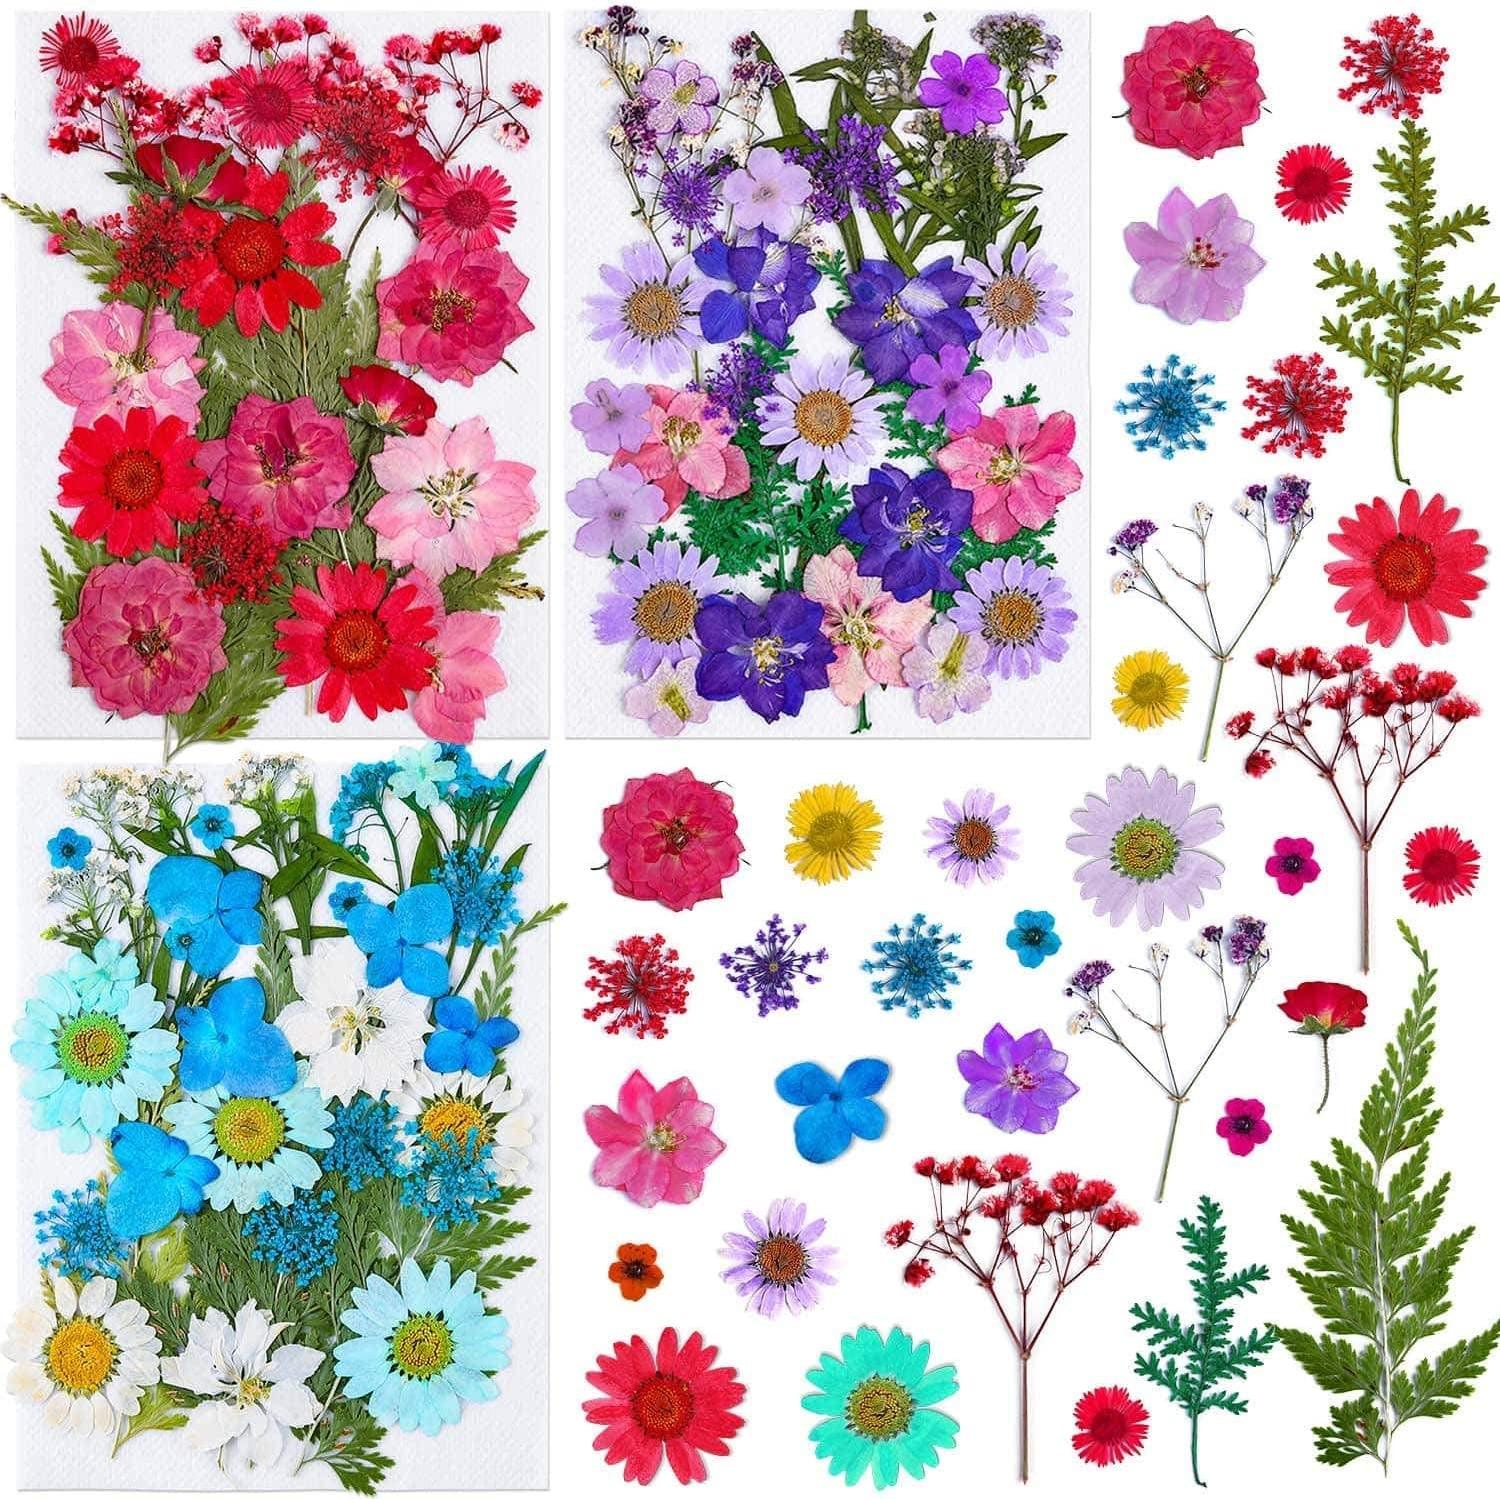 140 Pcs Dried Pressed Flowers for Resin Real Pressed Flowers Dry Leaves Bulk Natural Herbs Kit for Scrapbooking DIY Art Crafts Epoxy Resin Jewelry